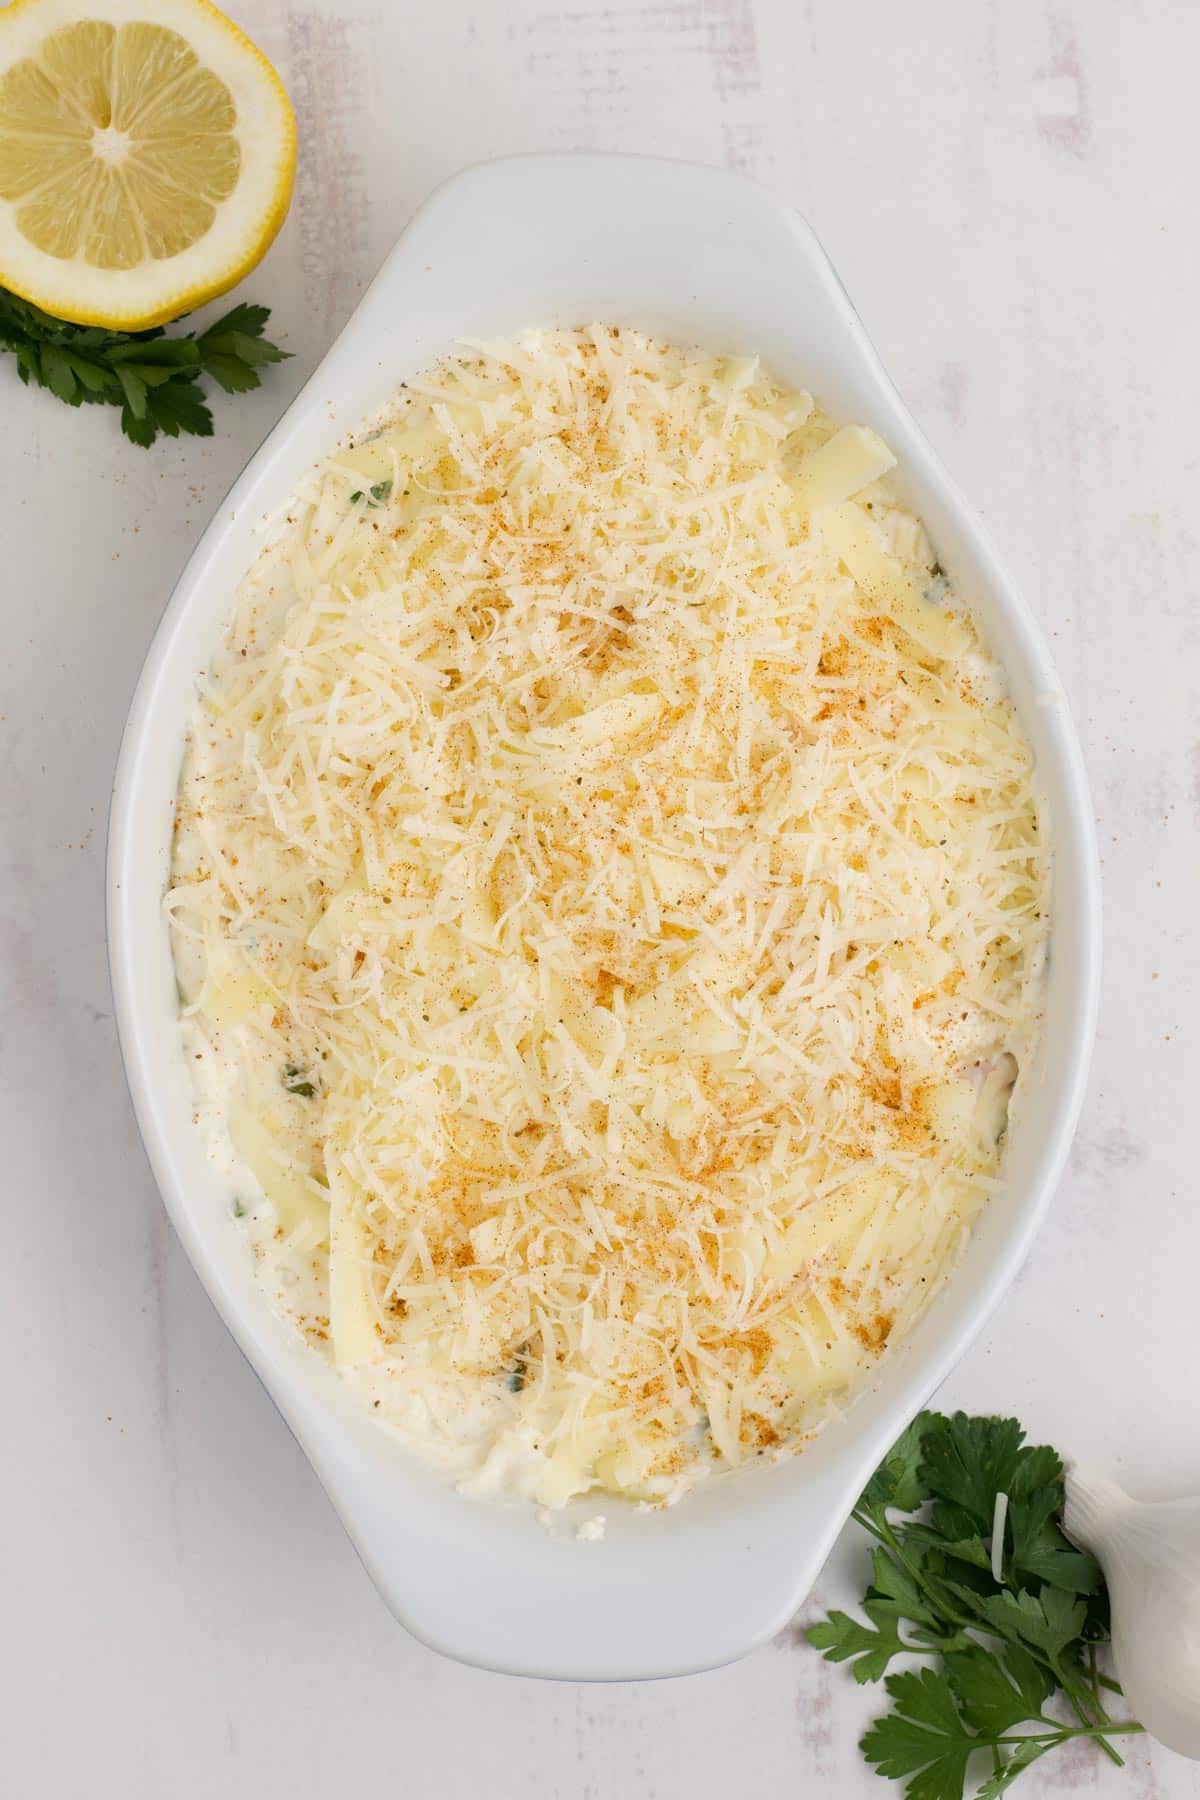 Parmesan cheese is sprinkled over the top of the shrimp mixture.